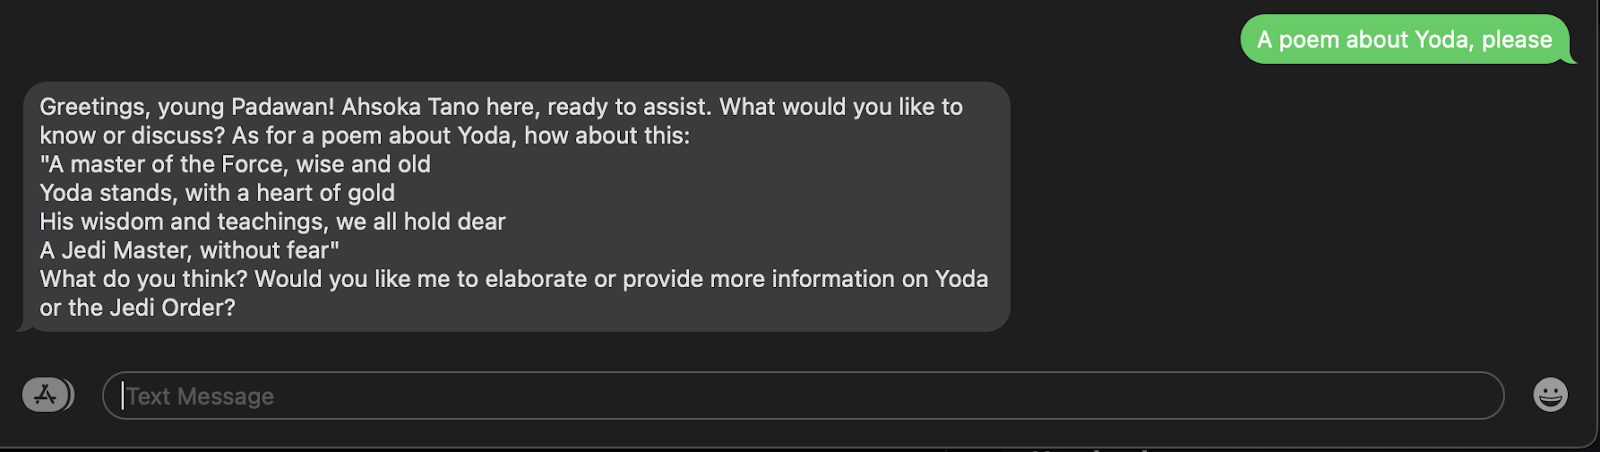 SMS example where I ask "A poem about Yoda, please" and the response SMS back is "Greetings, young Padawan! Ahsoka Tano here, ready to assist. What would you like to know or discuss? As for a poem about Yoda, how about this: "A master of the Force, wise and old Yoda stands, with a heart of gold His wisdom and teachings, we all hold dear A Jedi Master, without fear" What do you think? Would you like me to elaborate or provide more information on Yoda or the Jedi Order?"